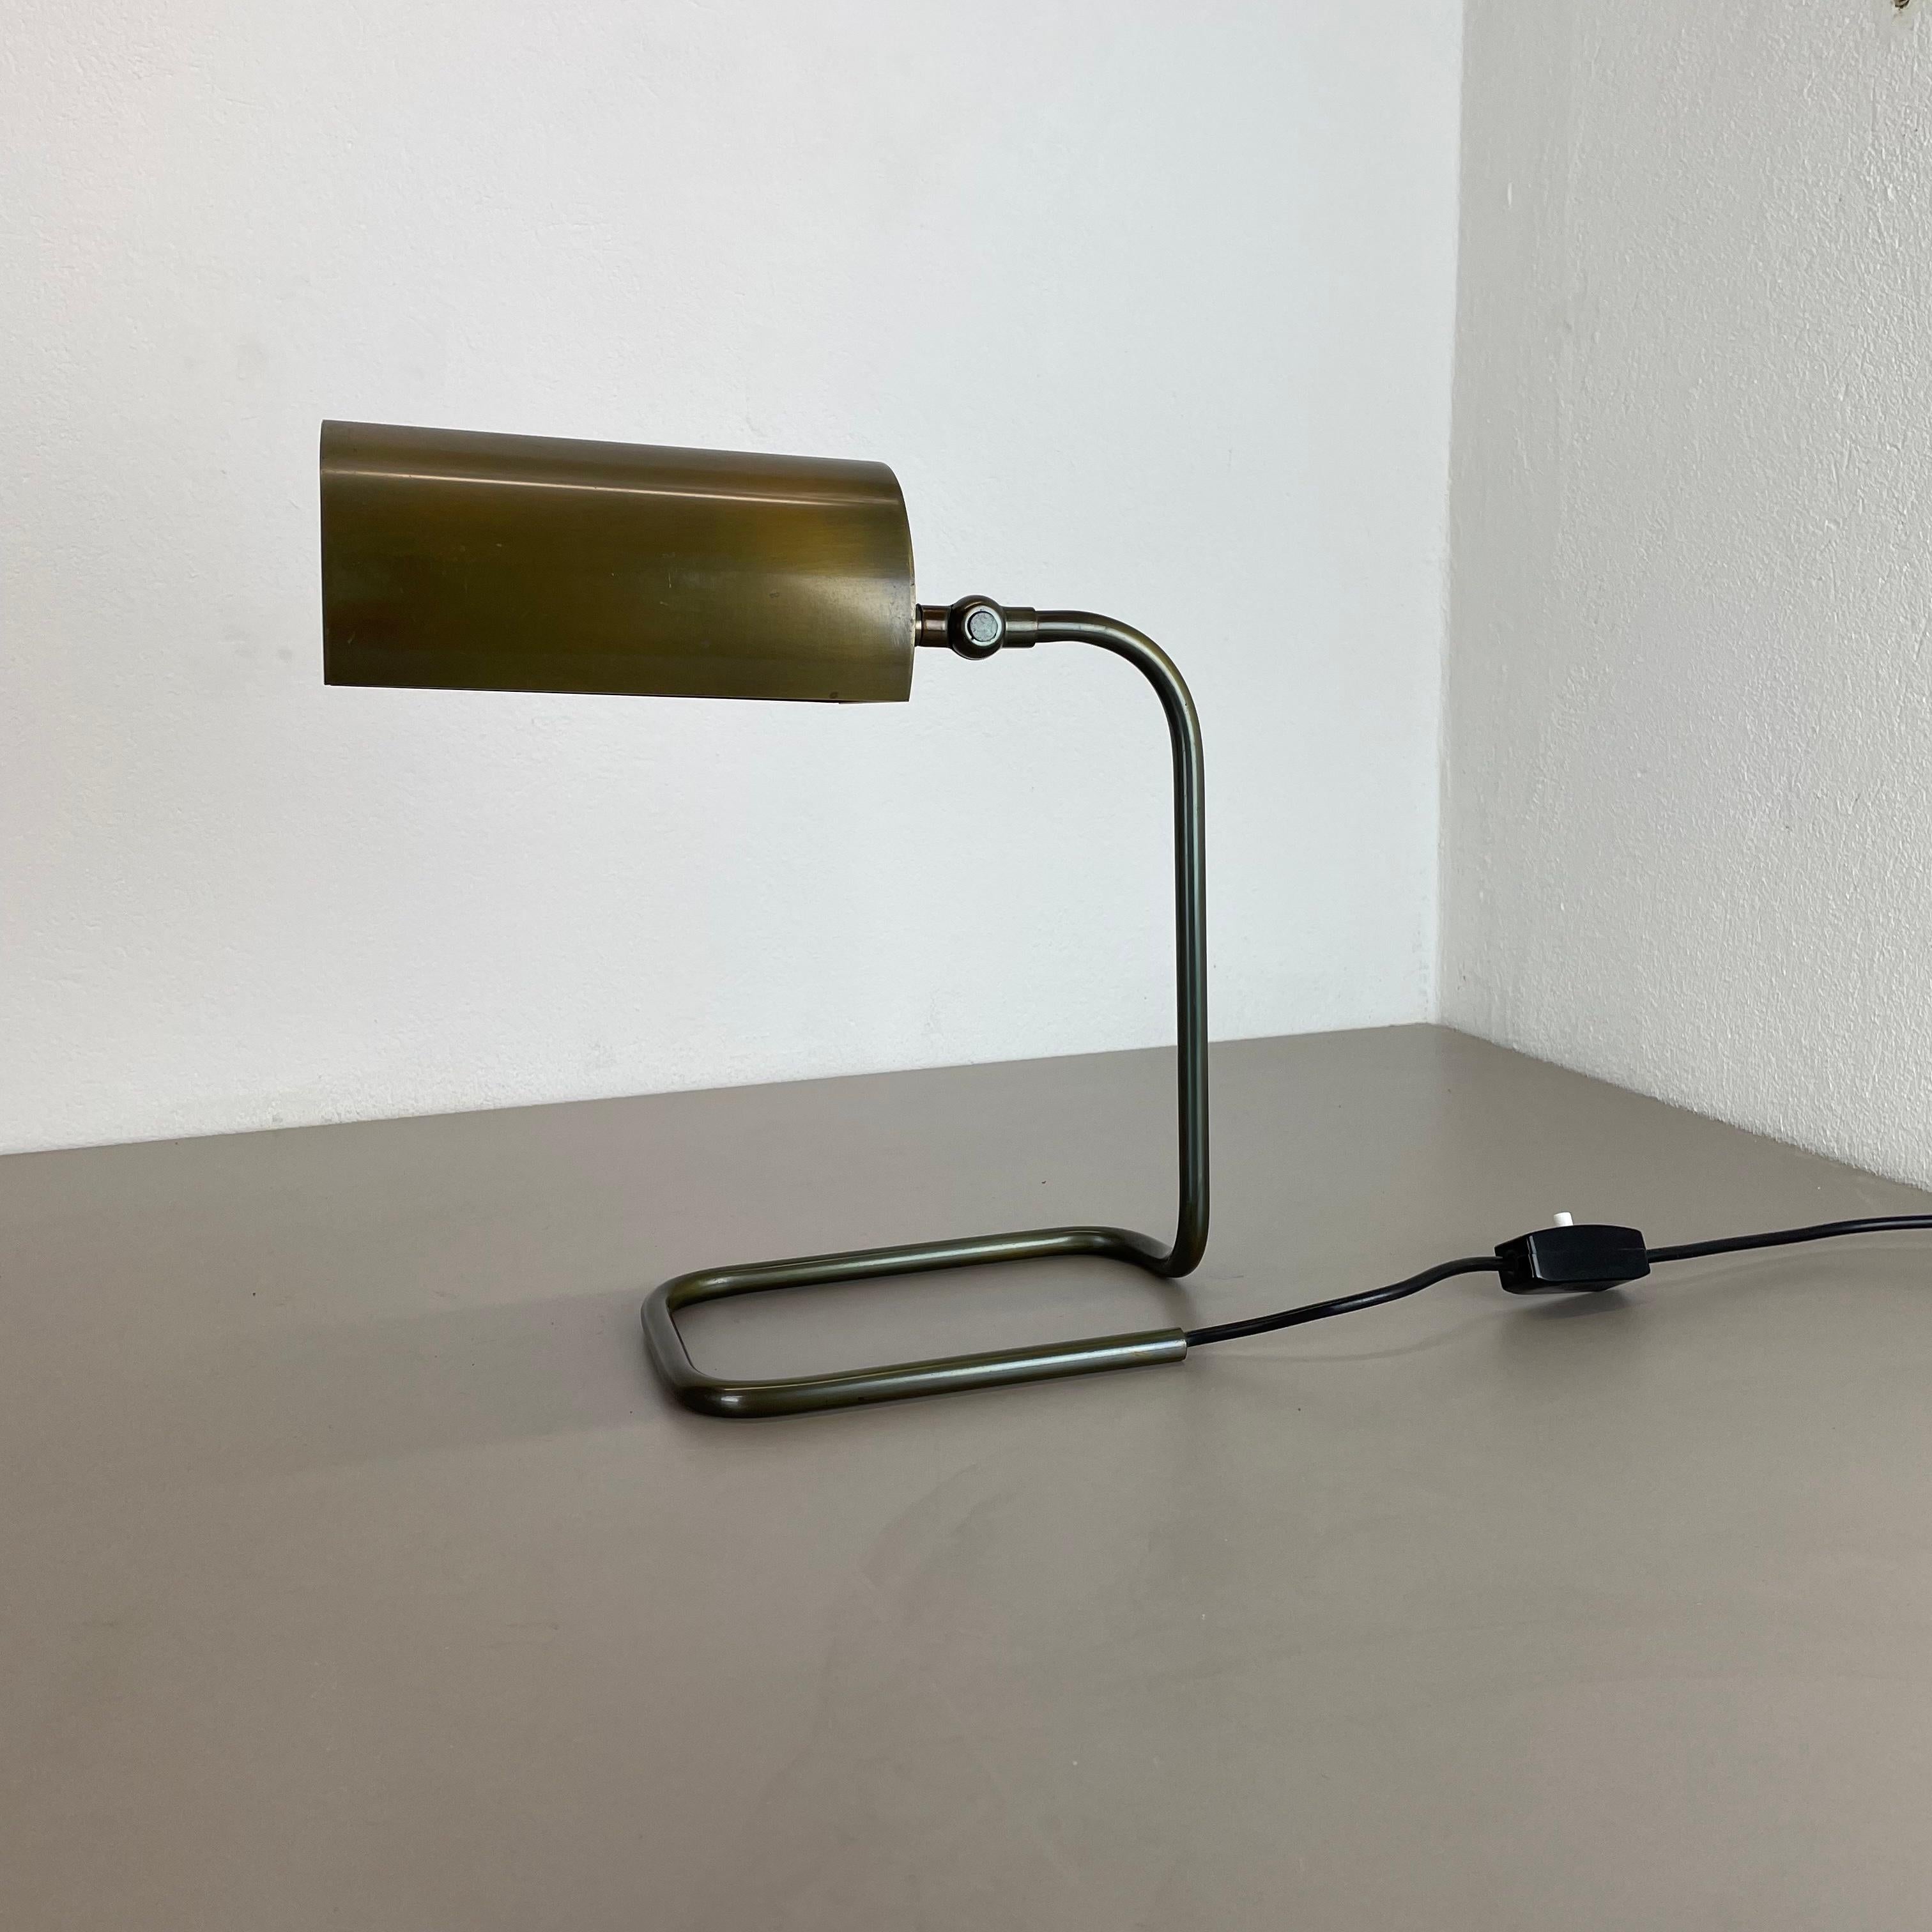 Article:

Table light


Origin:

Germany


Material:

Metal brass


Age:

1970s



Description:

This original vintage table light was designed and produced in Germany in the 1970s. This minimalist table light is made of solid